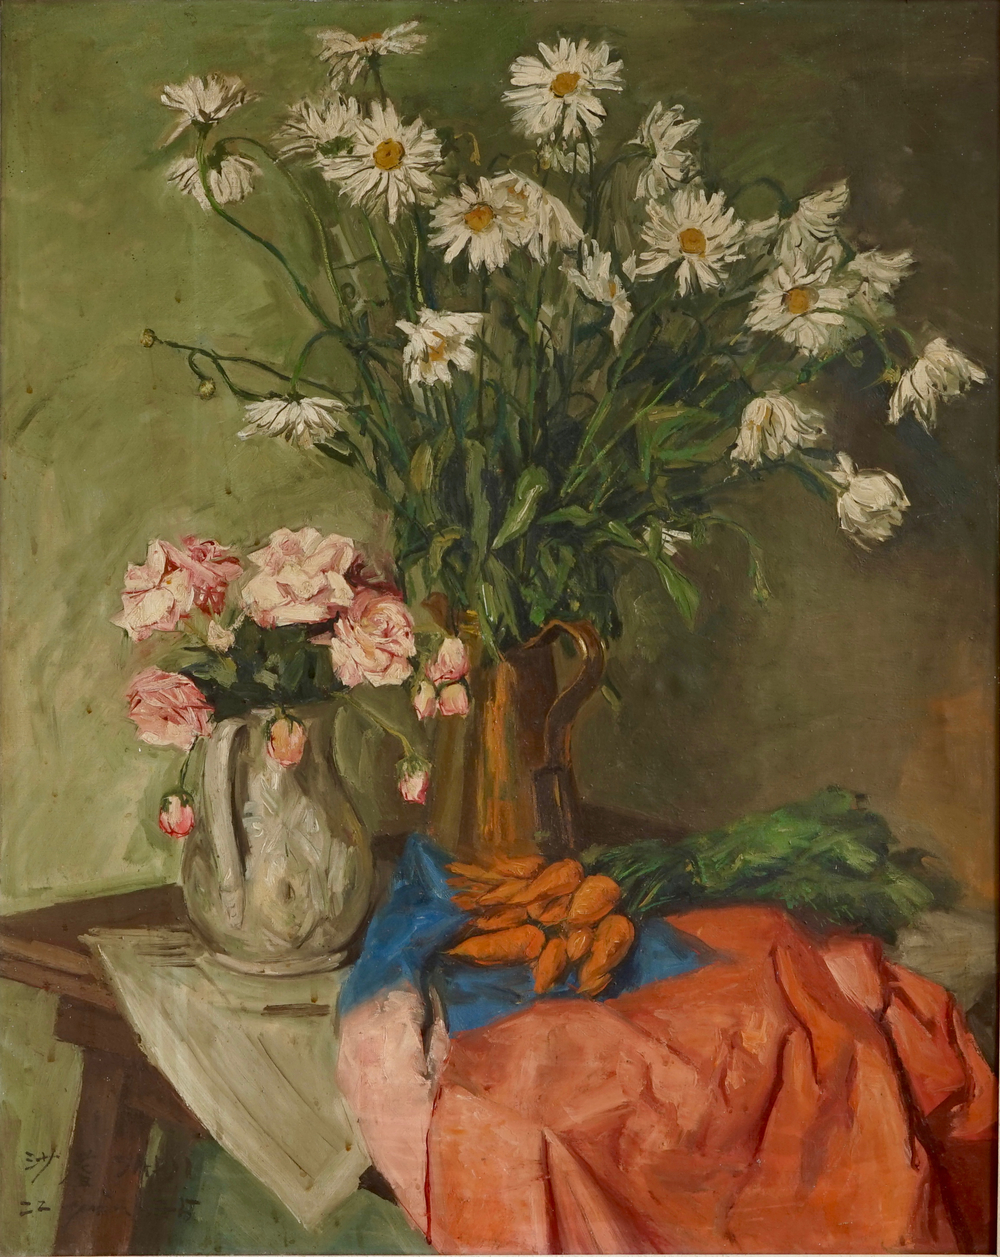 Sadji (Sha Qi, Sha Yinnian) (1914-2005), A still life with flowers and carrots, oil on canvas, dated 1945